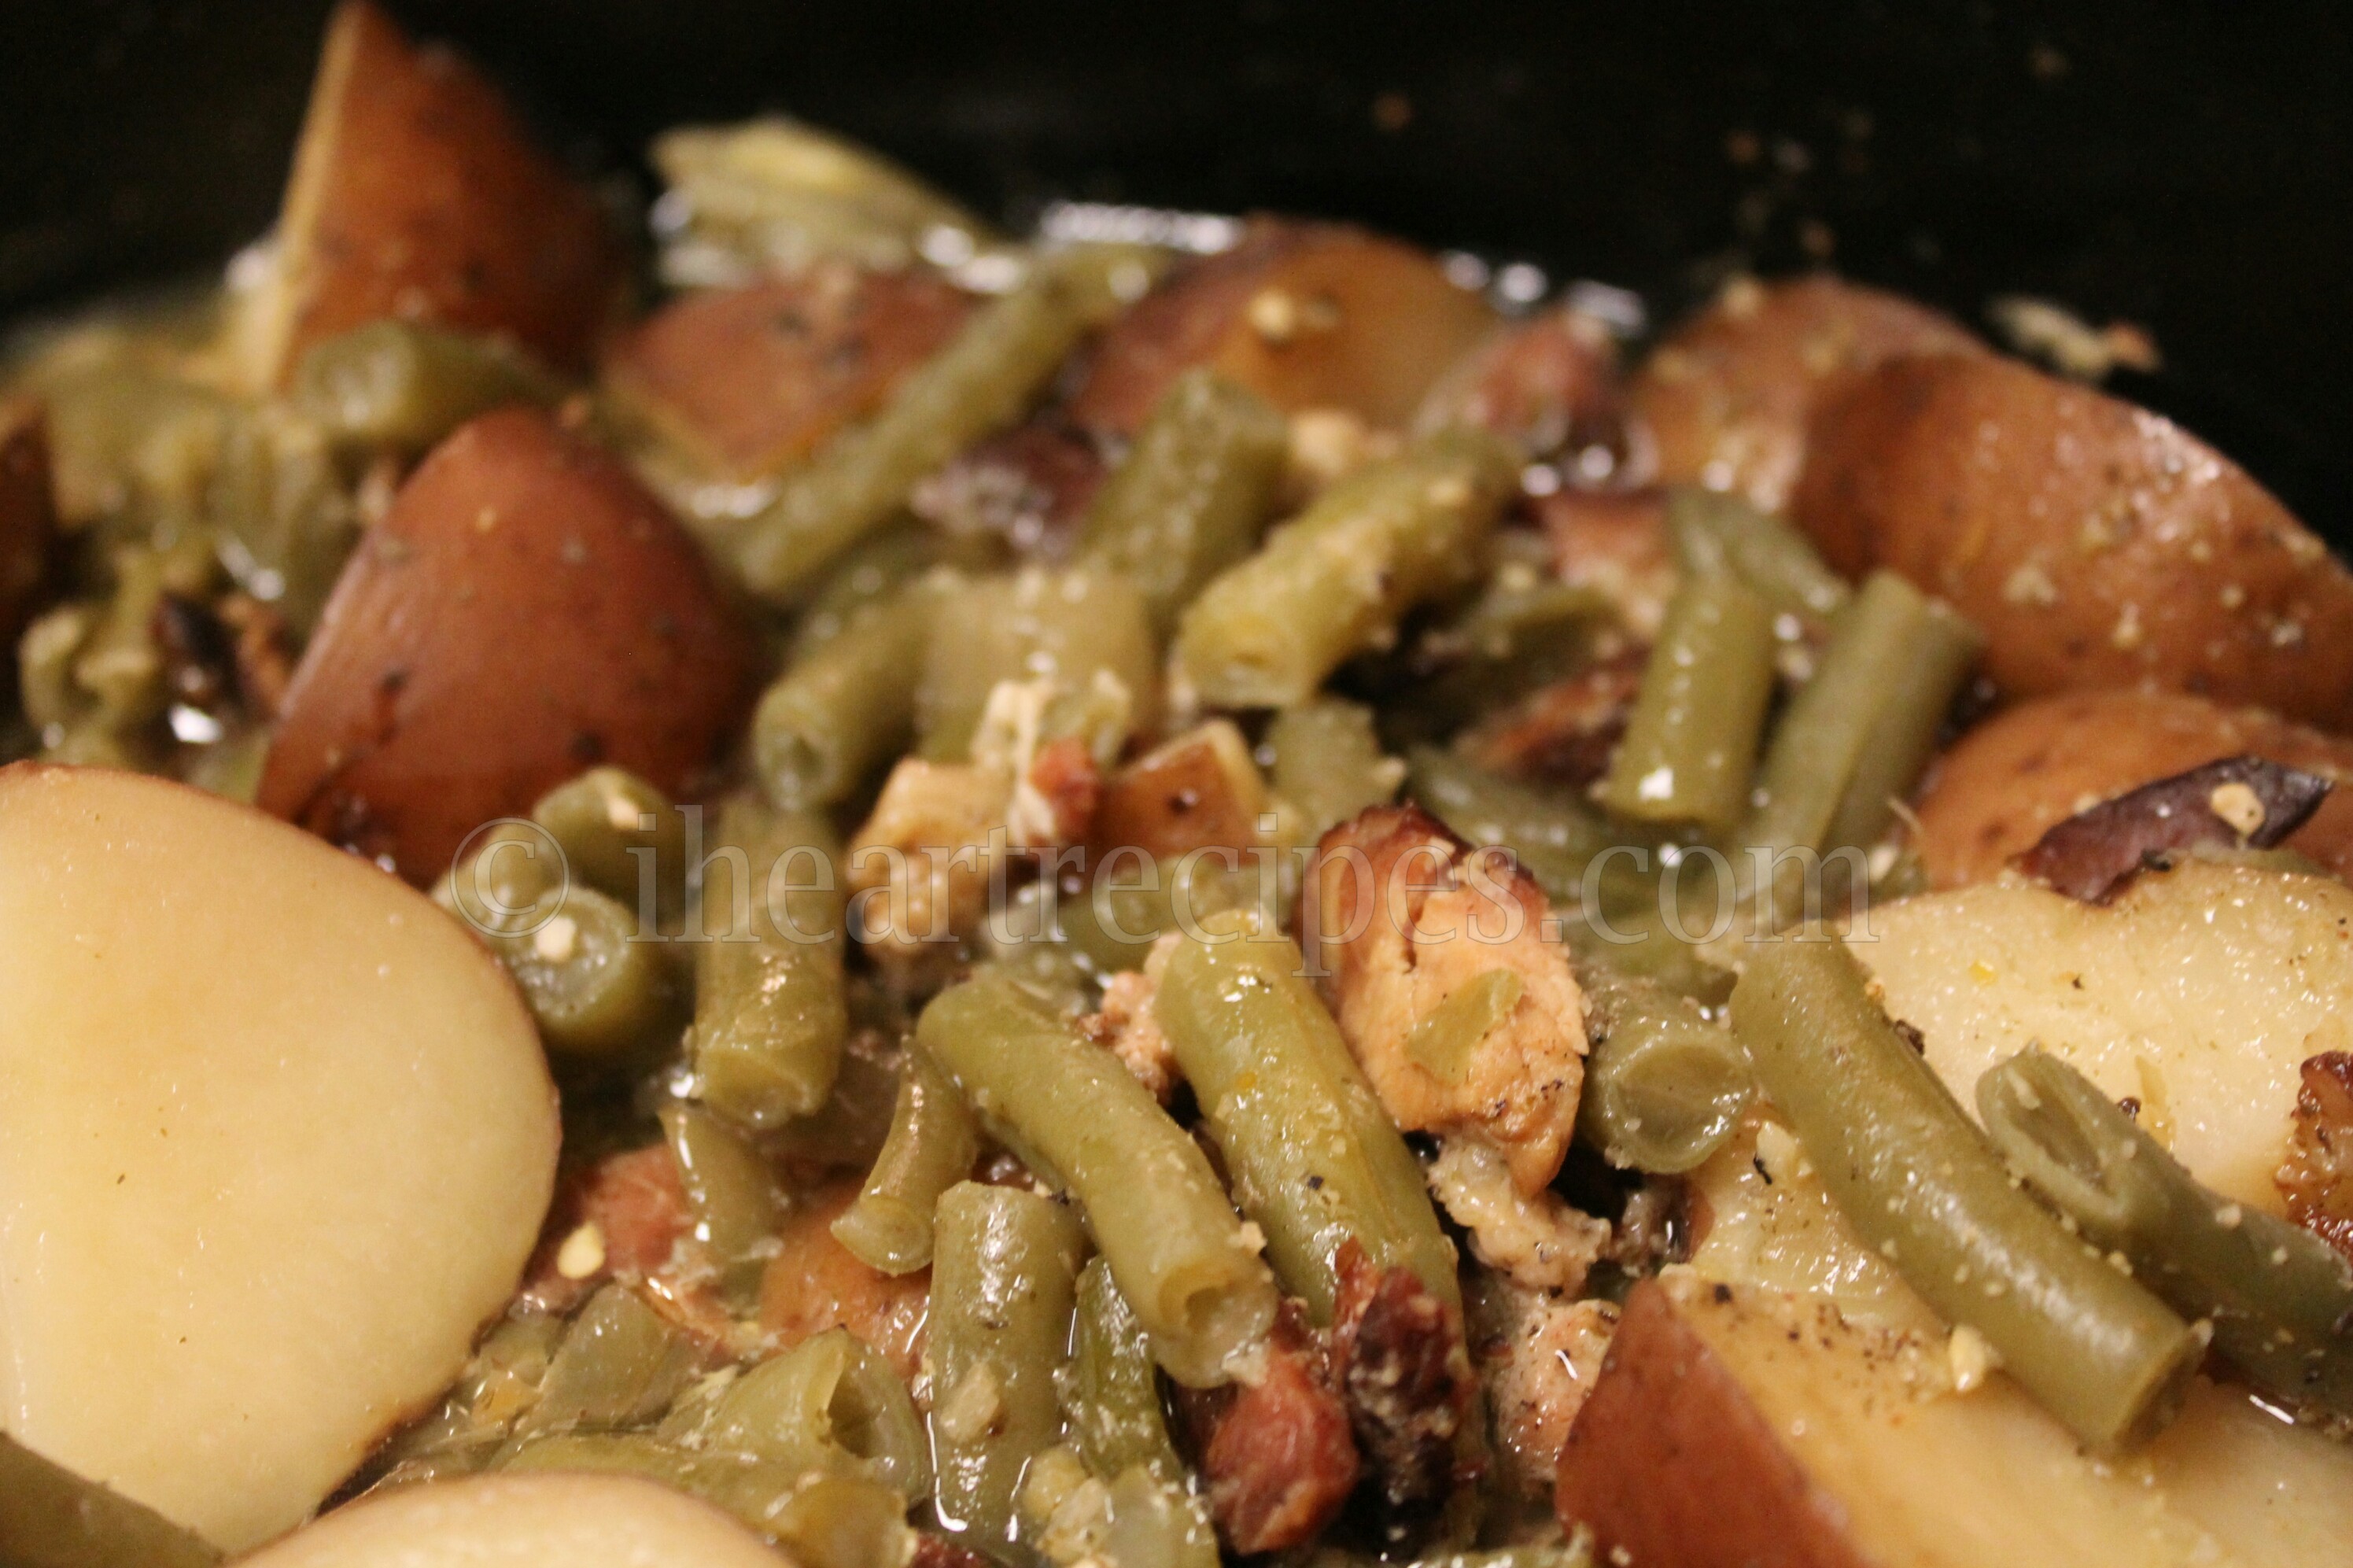 Delicious Southern veggies and potatoes